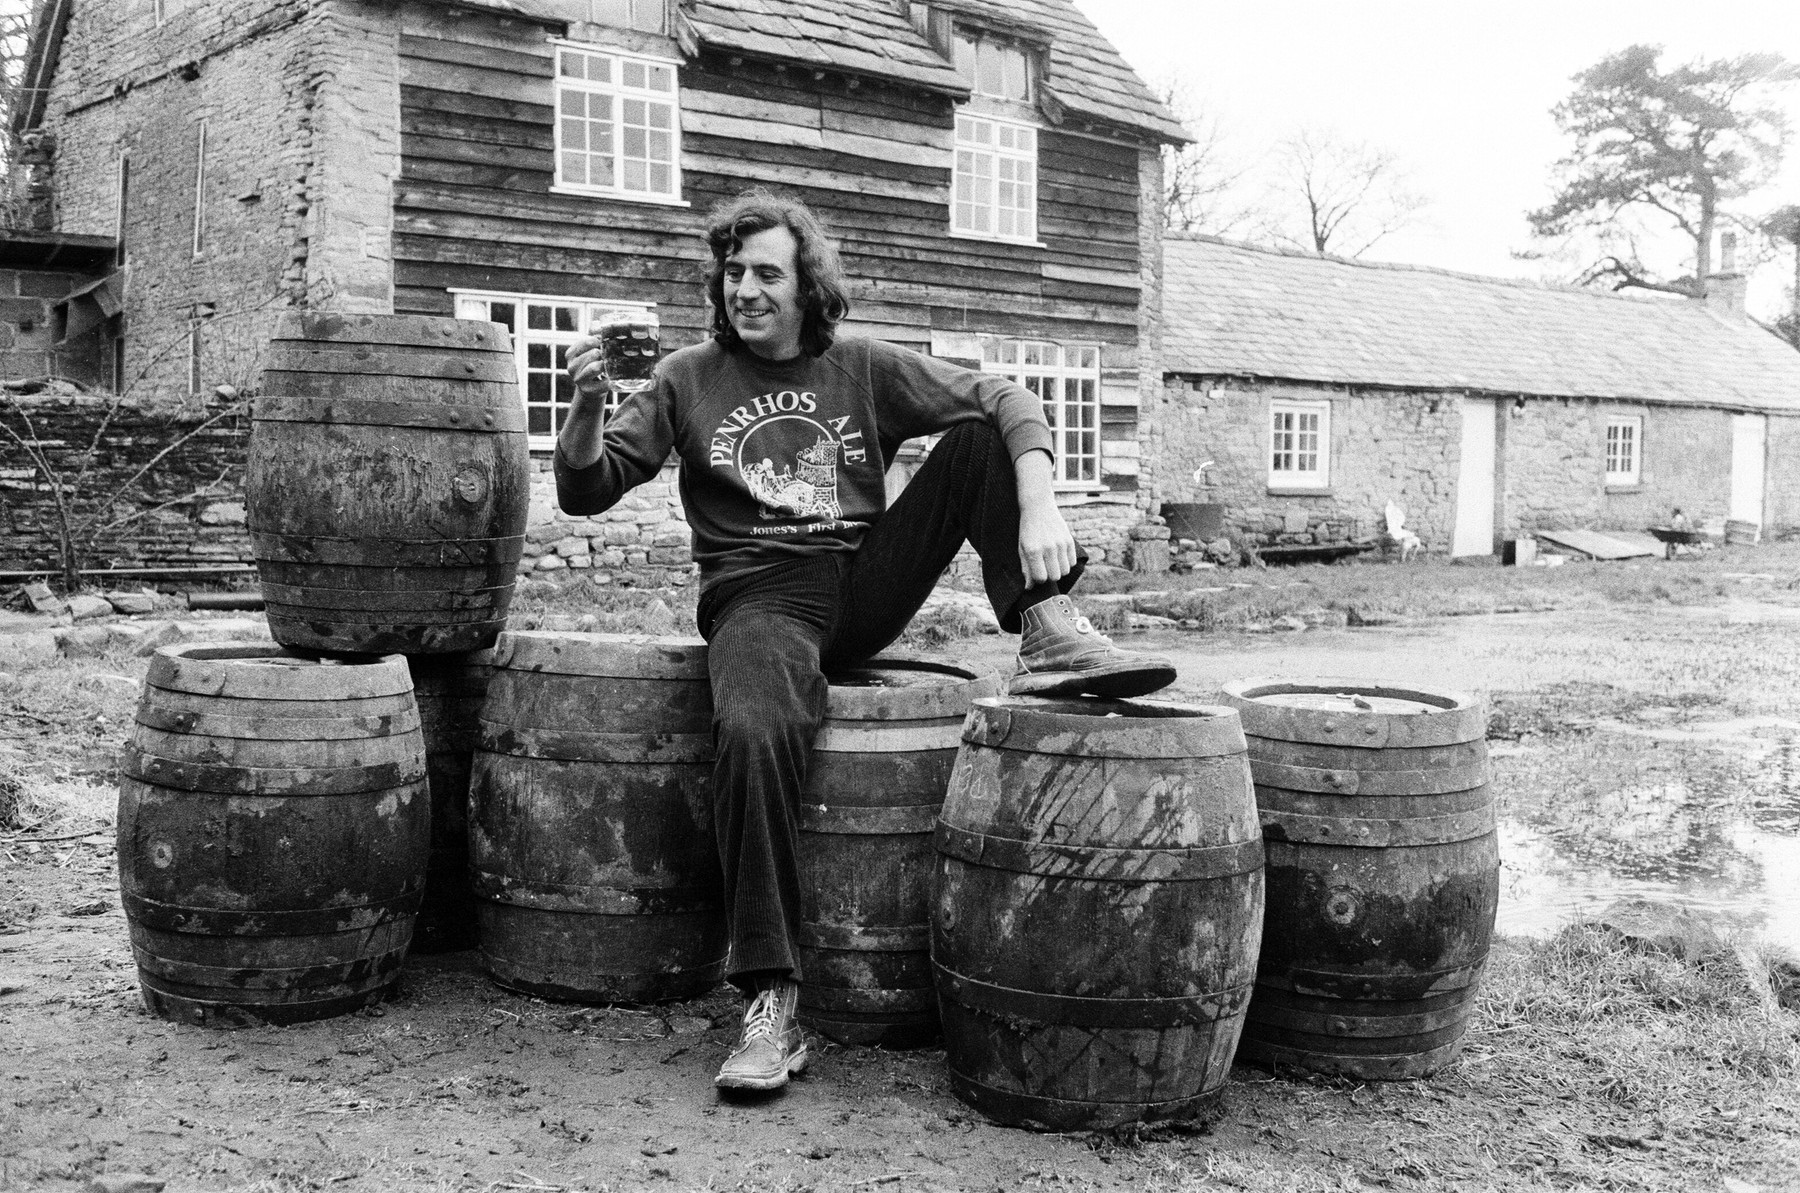 Terry Jones, script writer for Monty Python, has bought a brewery at Lyonshall, near Hereford. He is producing 100 barrels of beer weekly of his own brew called 'Jones Special'. 27th February 1978., Image: 494188897, License: Rights-managed, Restrictions: , Model Release: no, Credit line: George Phillips / MirrorPix / Profimedia